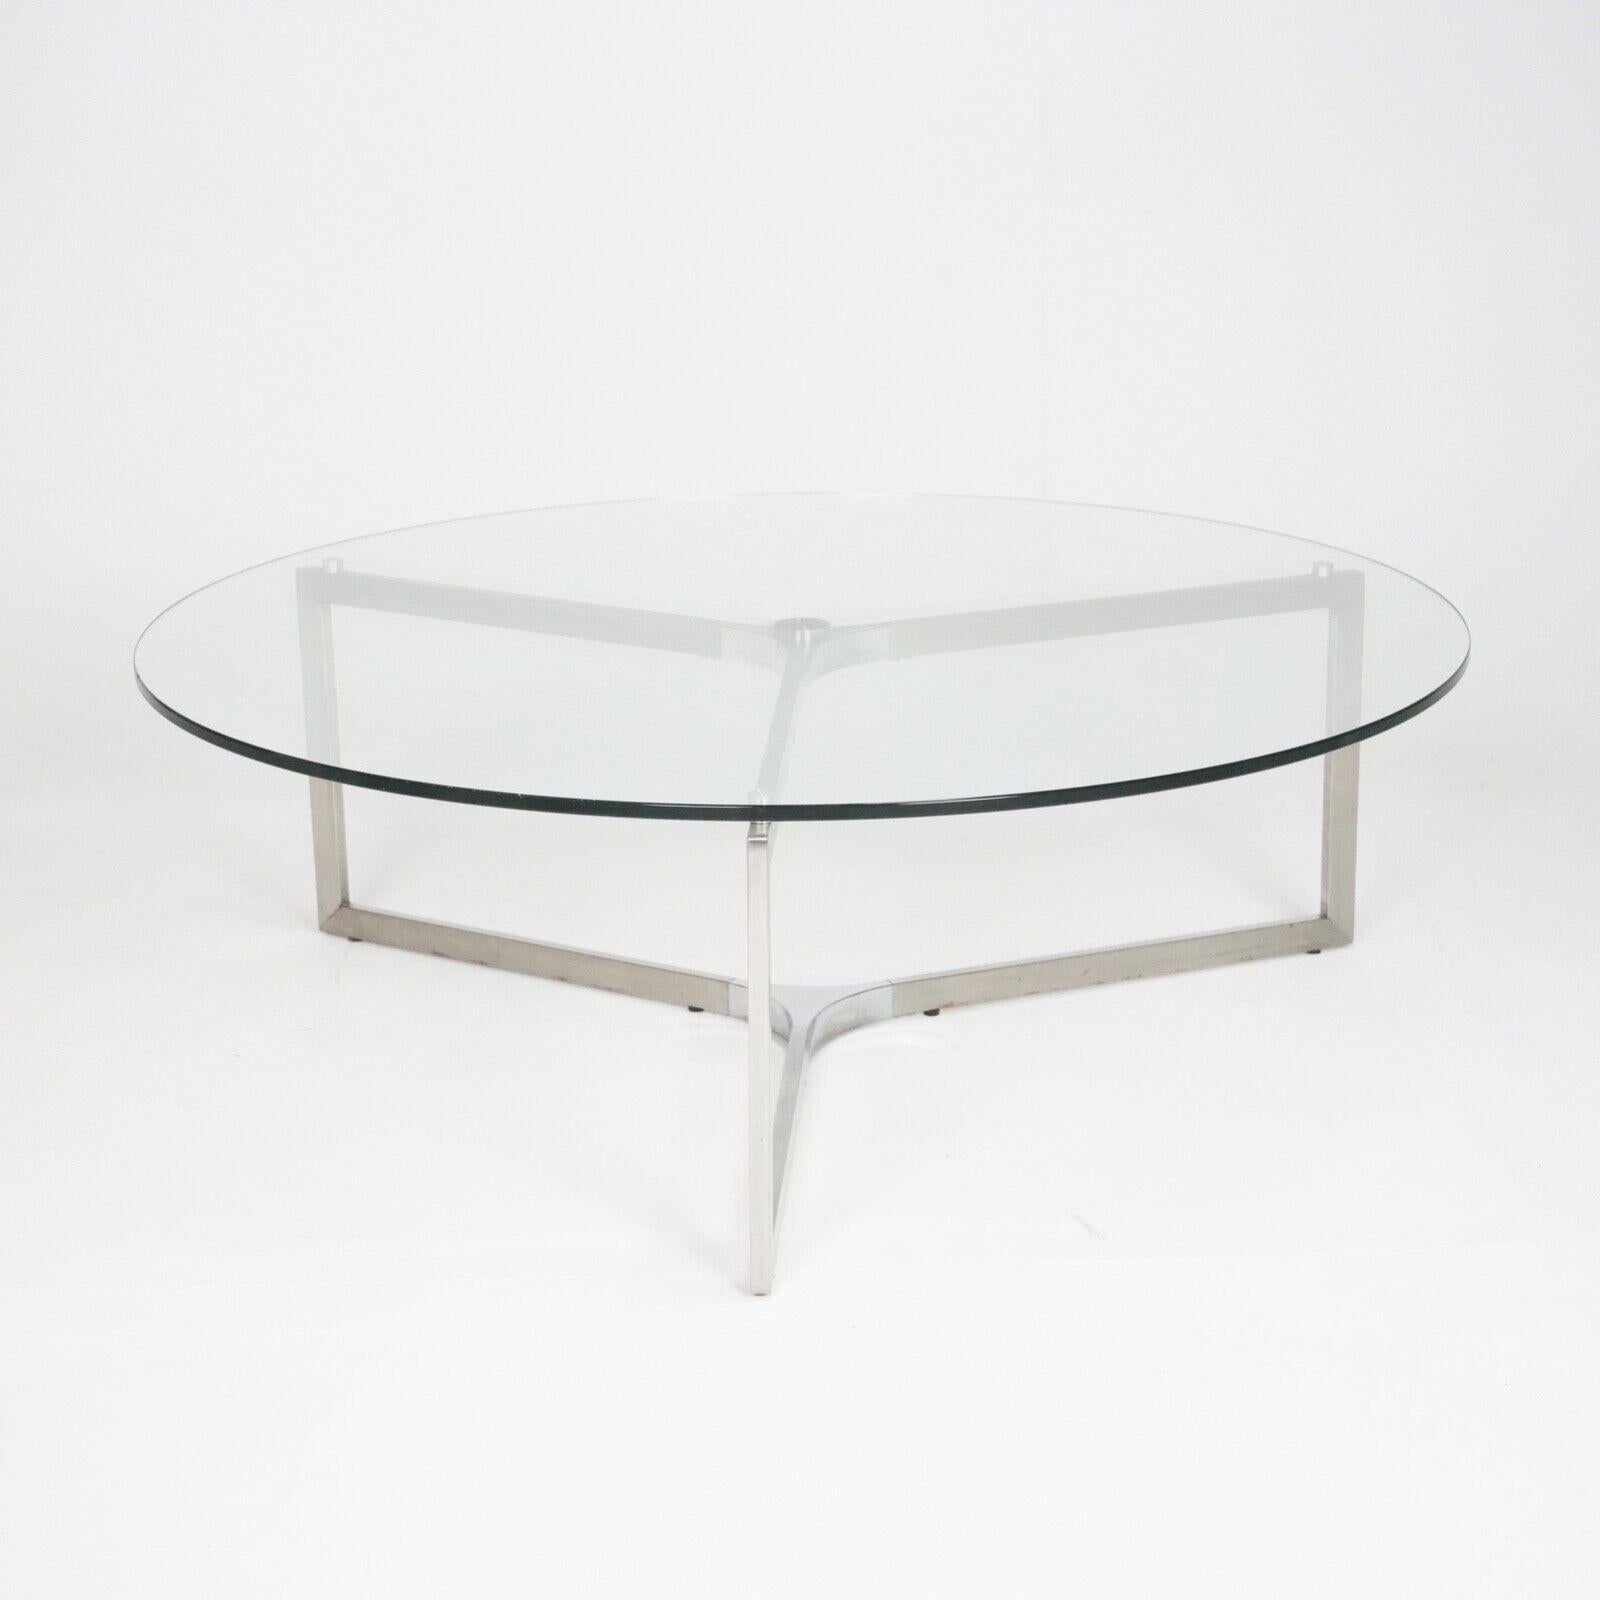 Glass and Metal coffee table designed by Ricardo Bello Dias.
Raj is a family of coffee tables with glass top designed by the Italian-Brazilian designer Richard Bello Dias for Gallotti & Radice. They are characterised by the spectacular metal base in